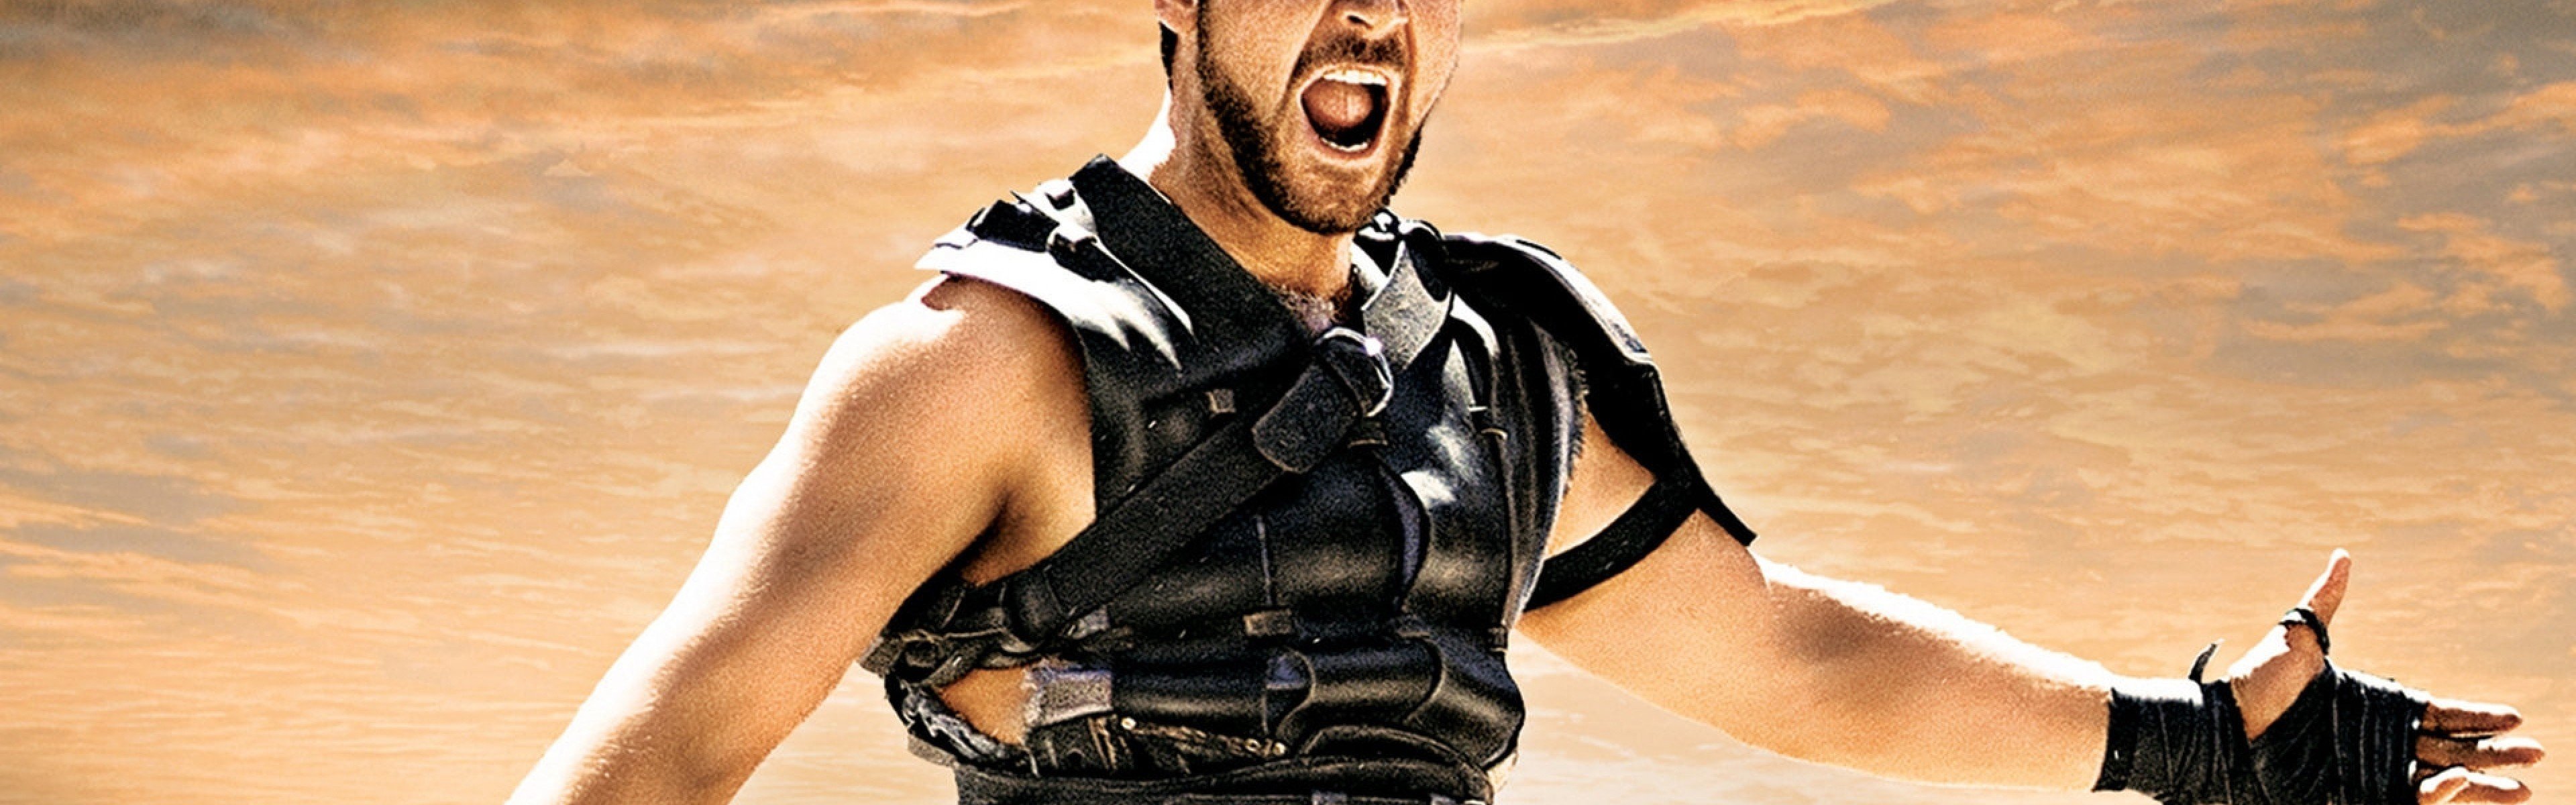 Гладиатор ill see you again soon but not yet. Gladiator Russell Crowe PNG. Are you not entertained. Gladiator песня облака.